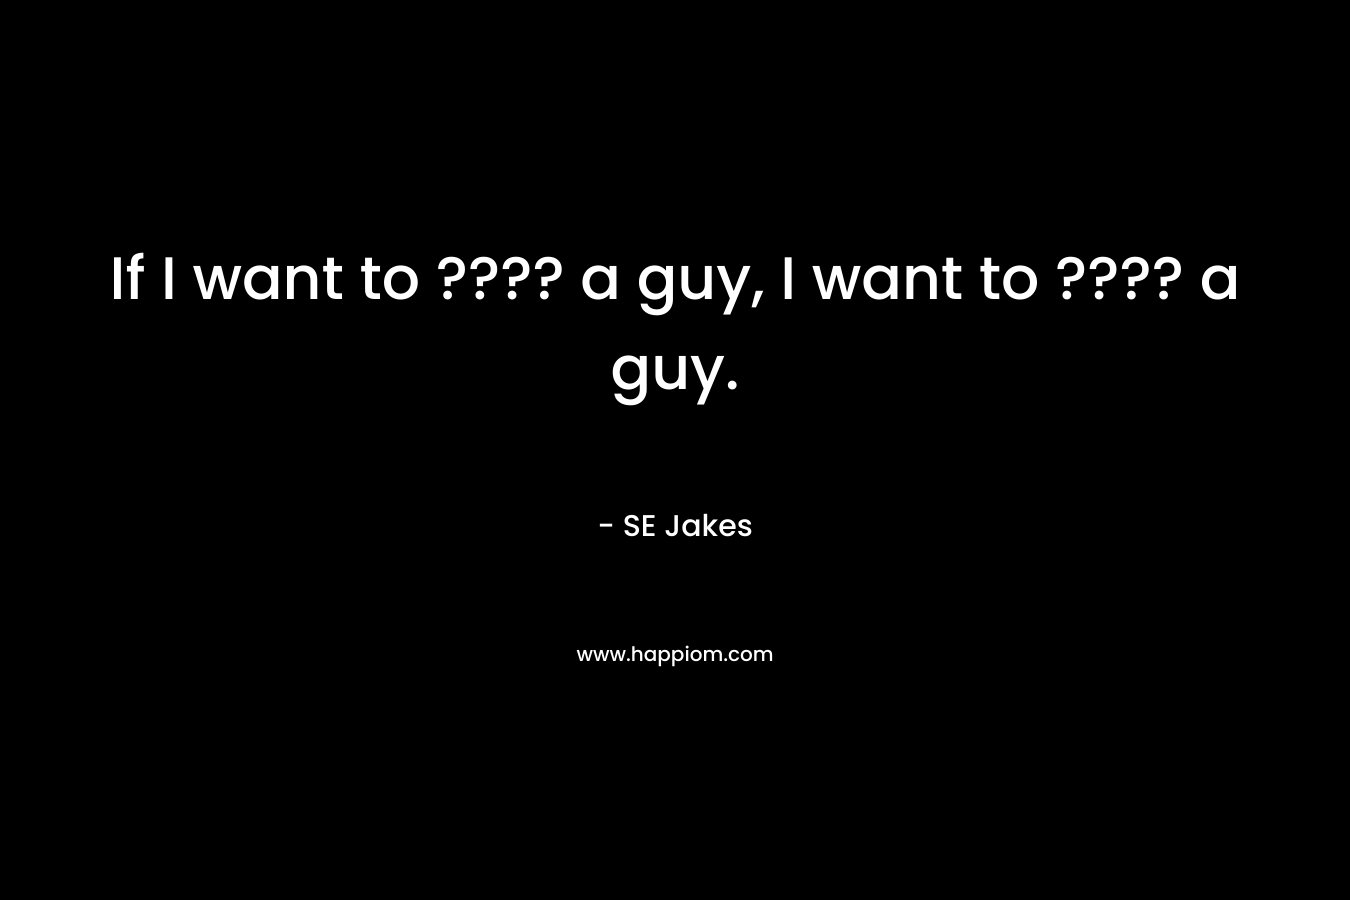 If I want to ???? a guy, I want to ???? a guy.